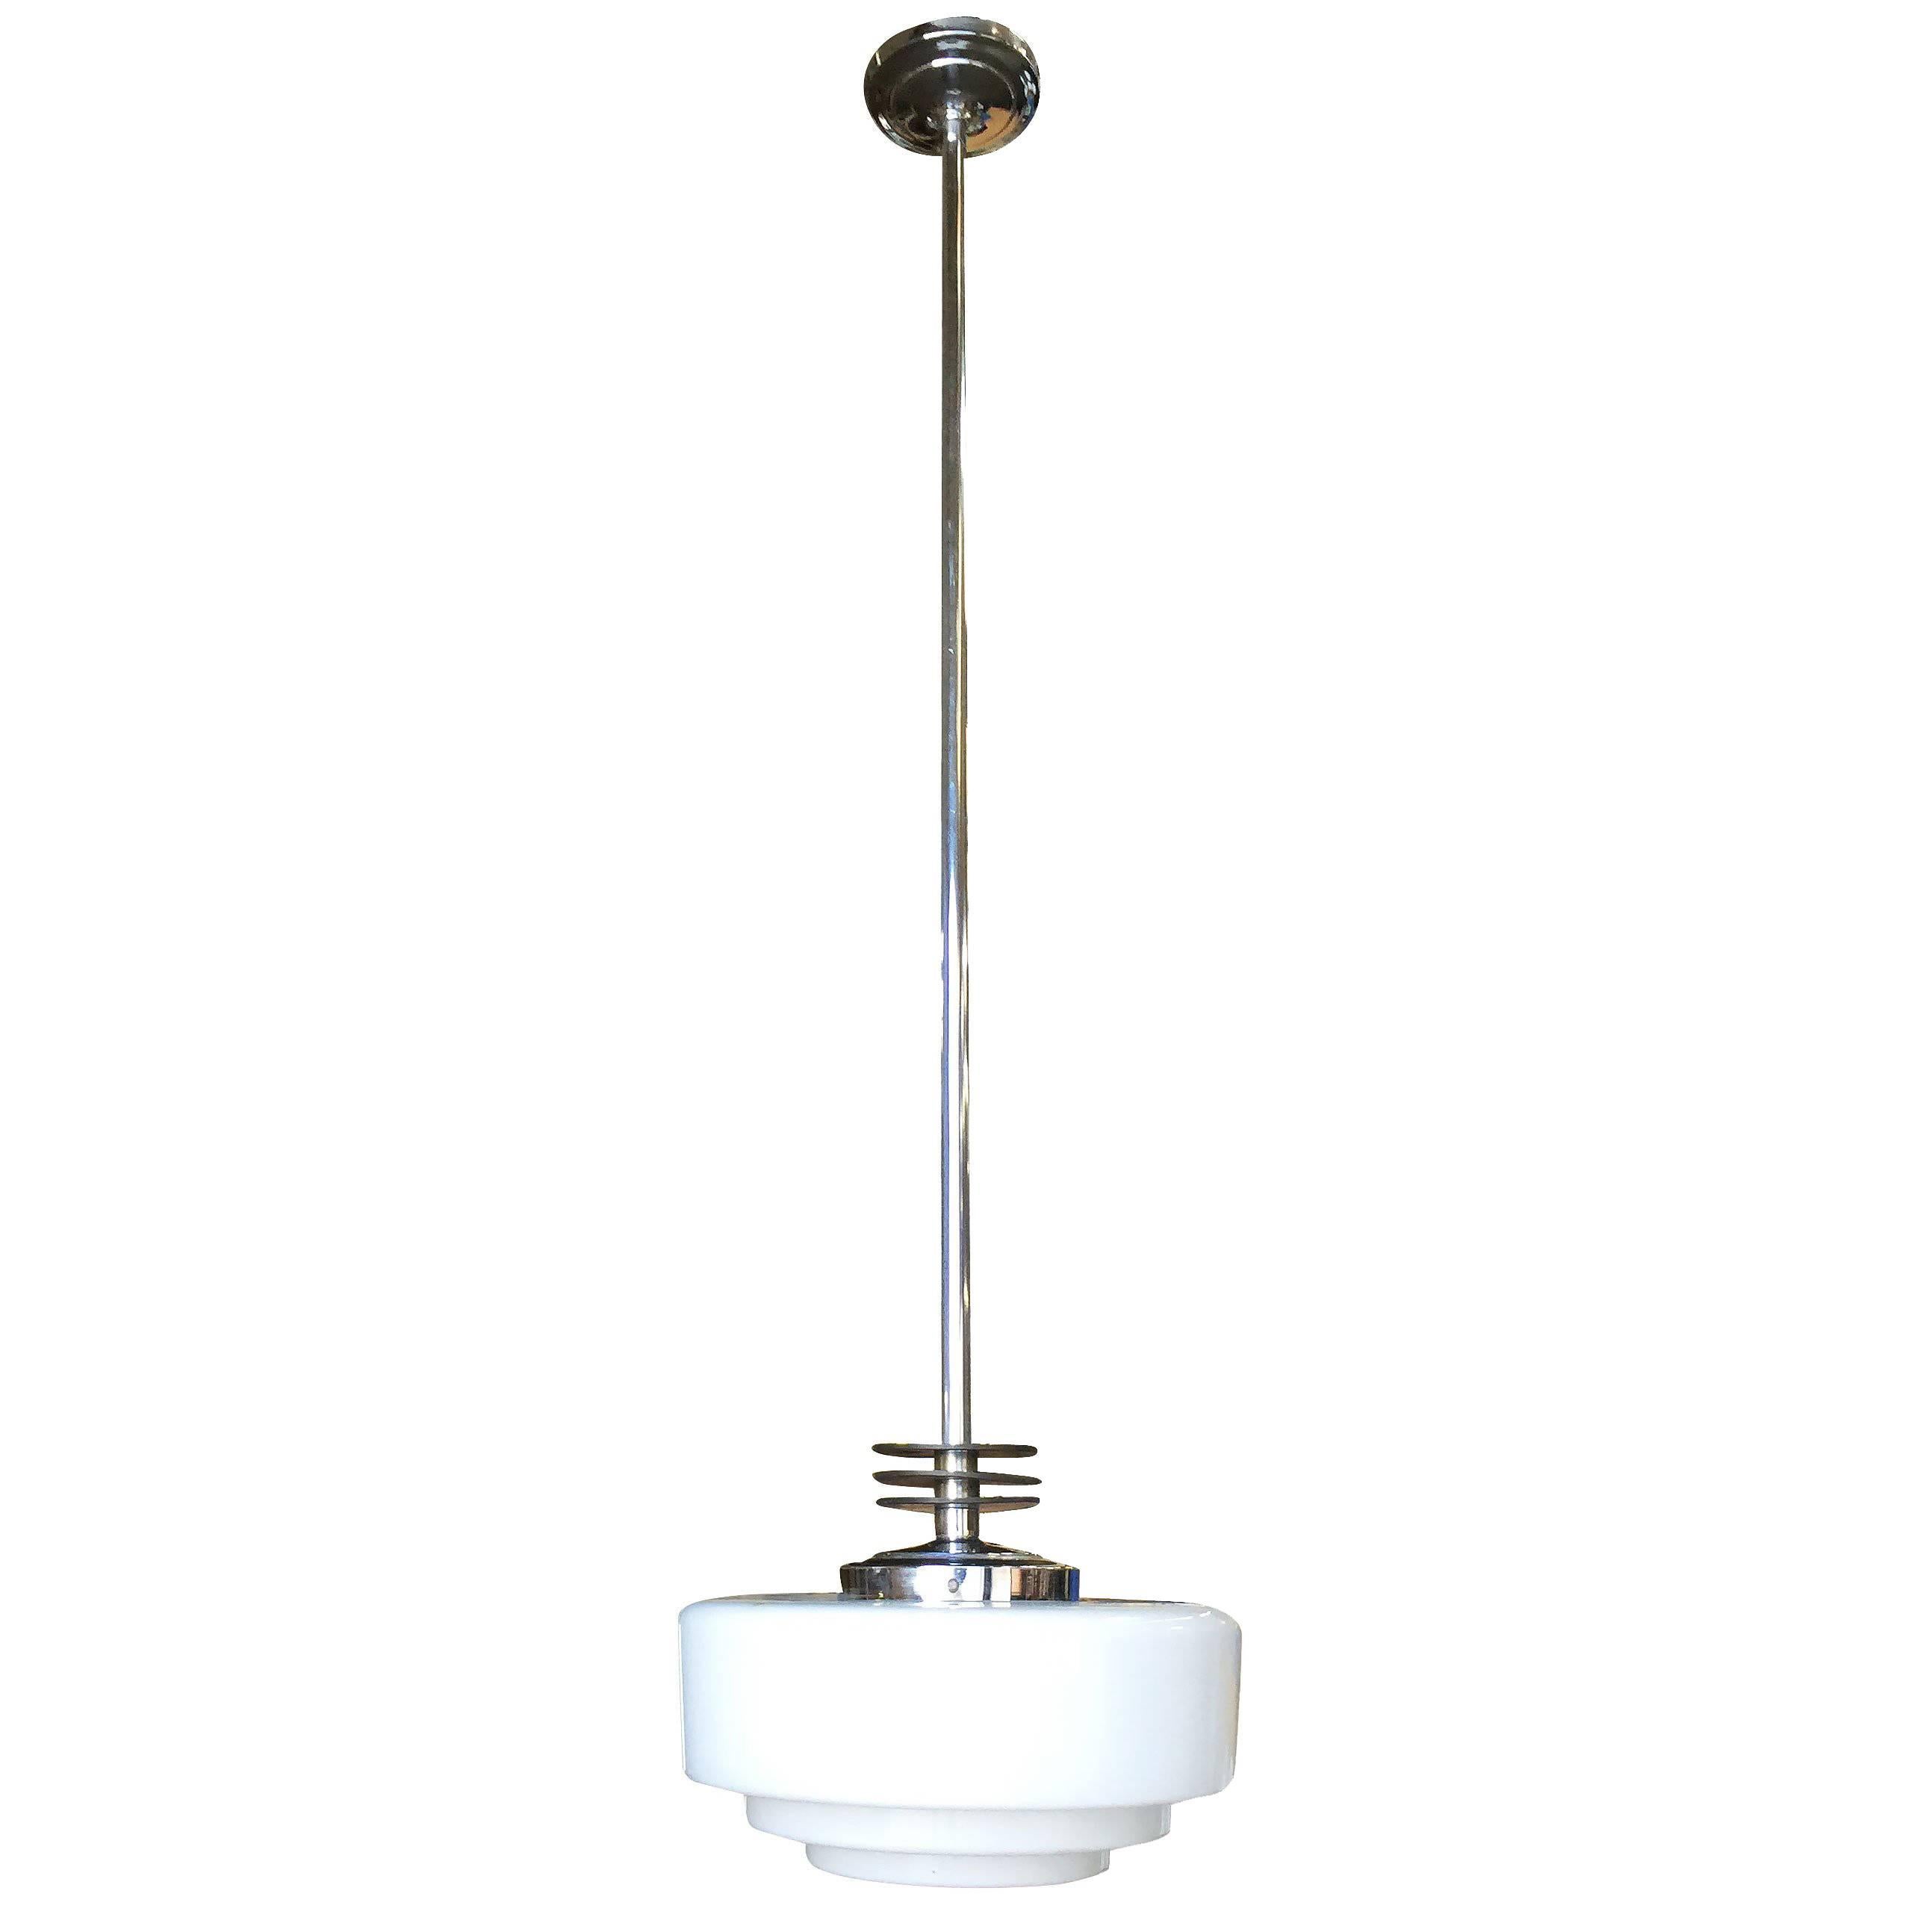 Streamline Ceiling Pendant with Hand-Painted Stepped Cake Globe